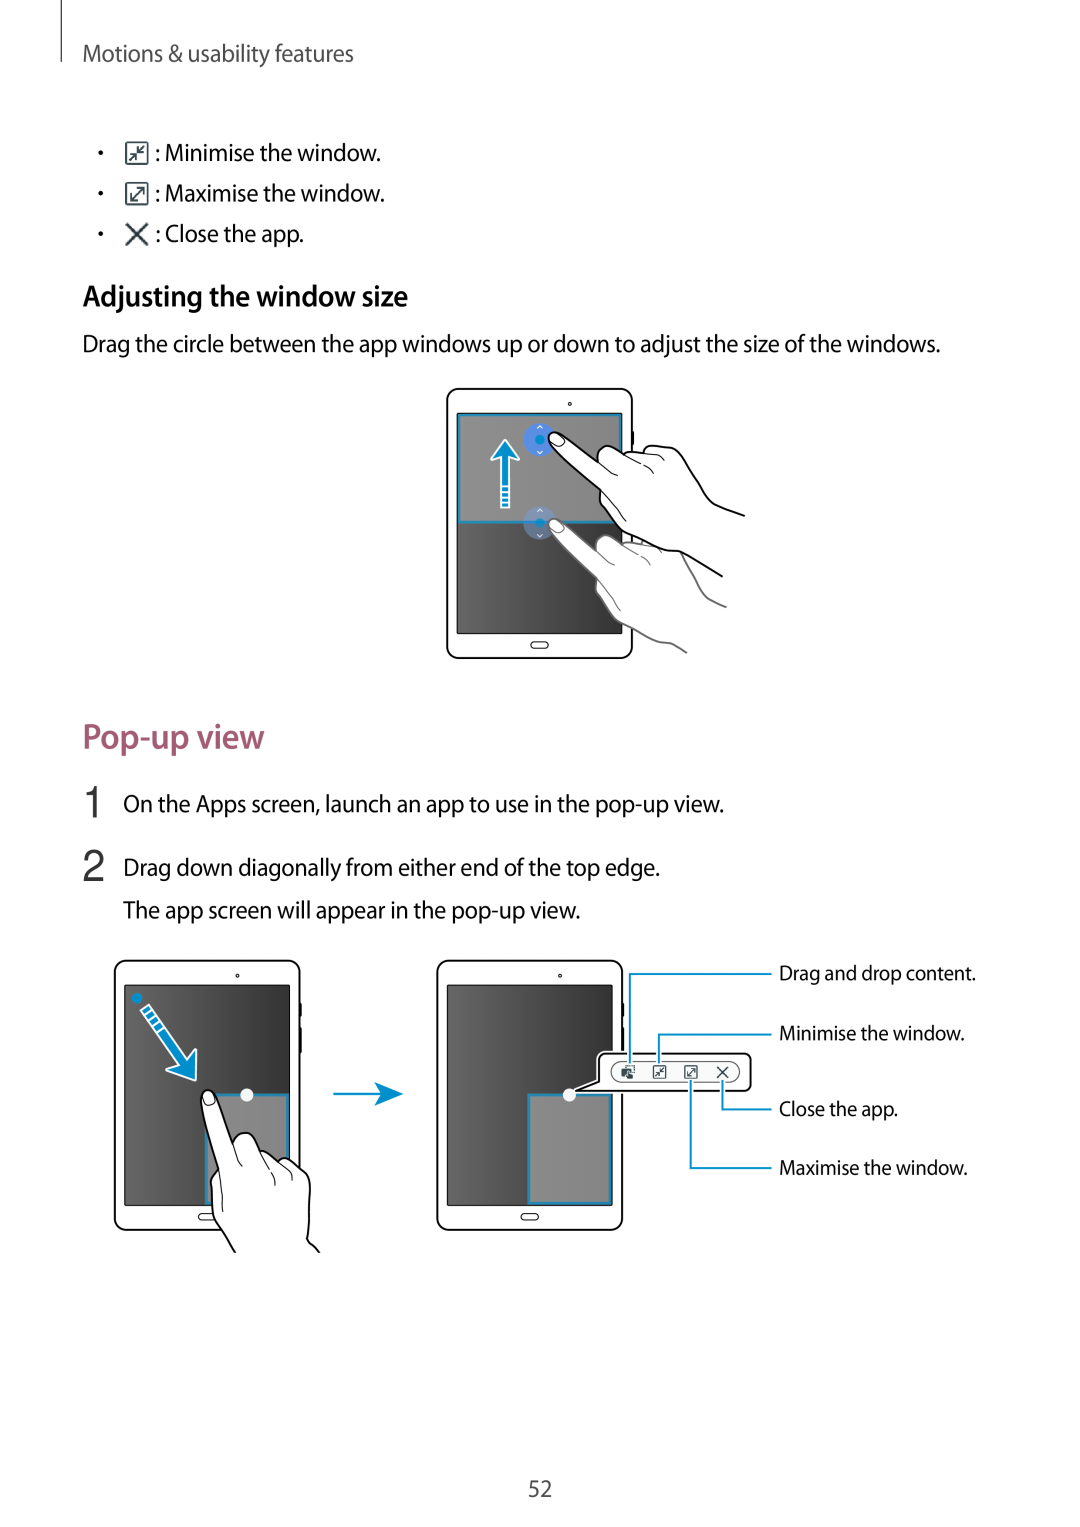 Samsung SM-P550NZKAPHE manual Pop-up view, Adjusting the window size, Motions & usability features, Maximise the window 